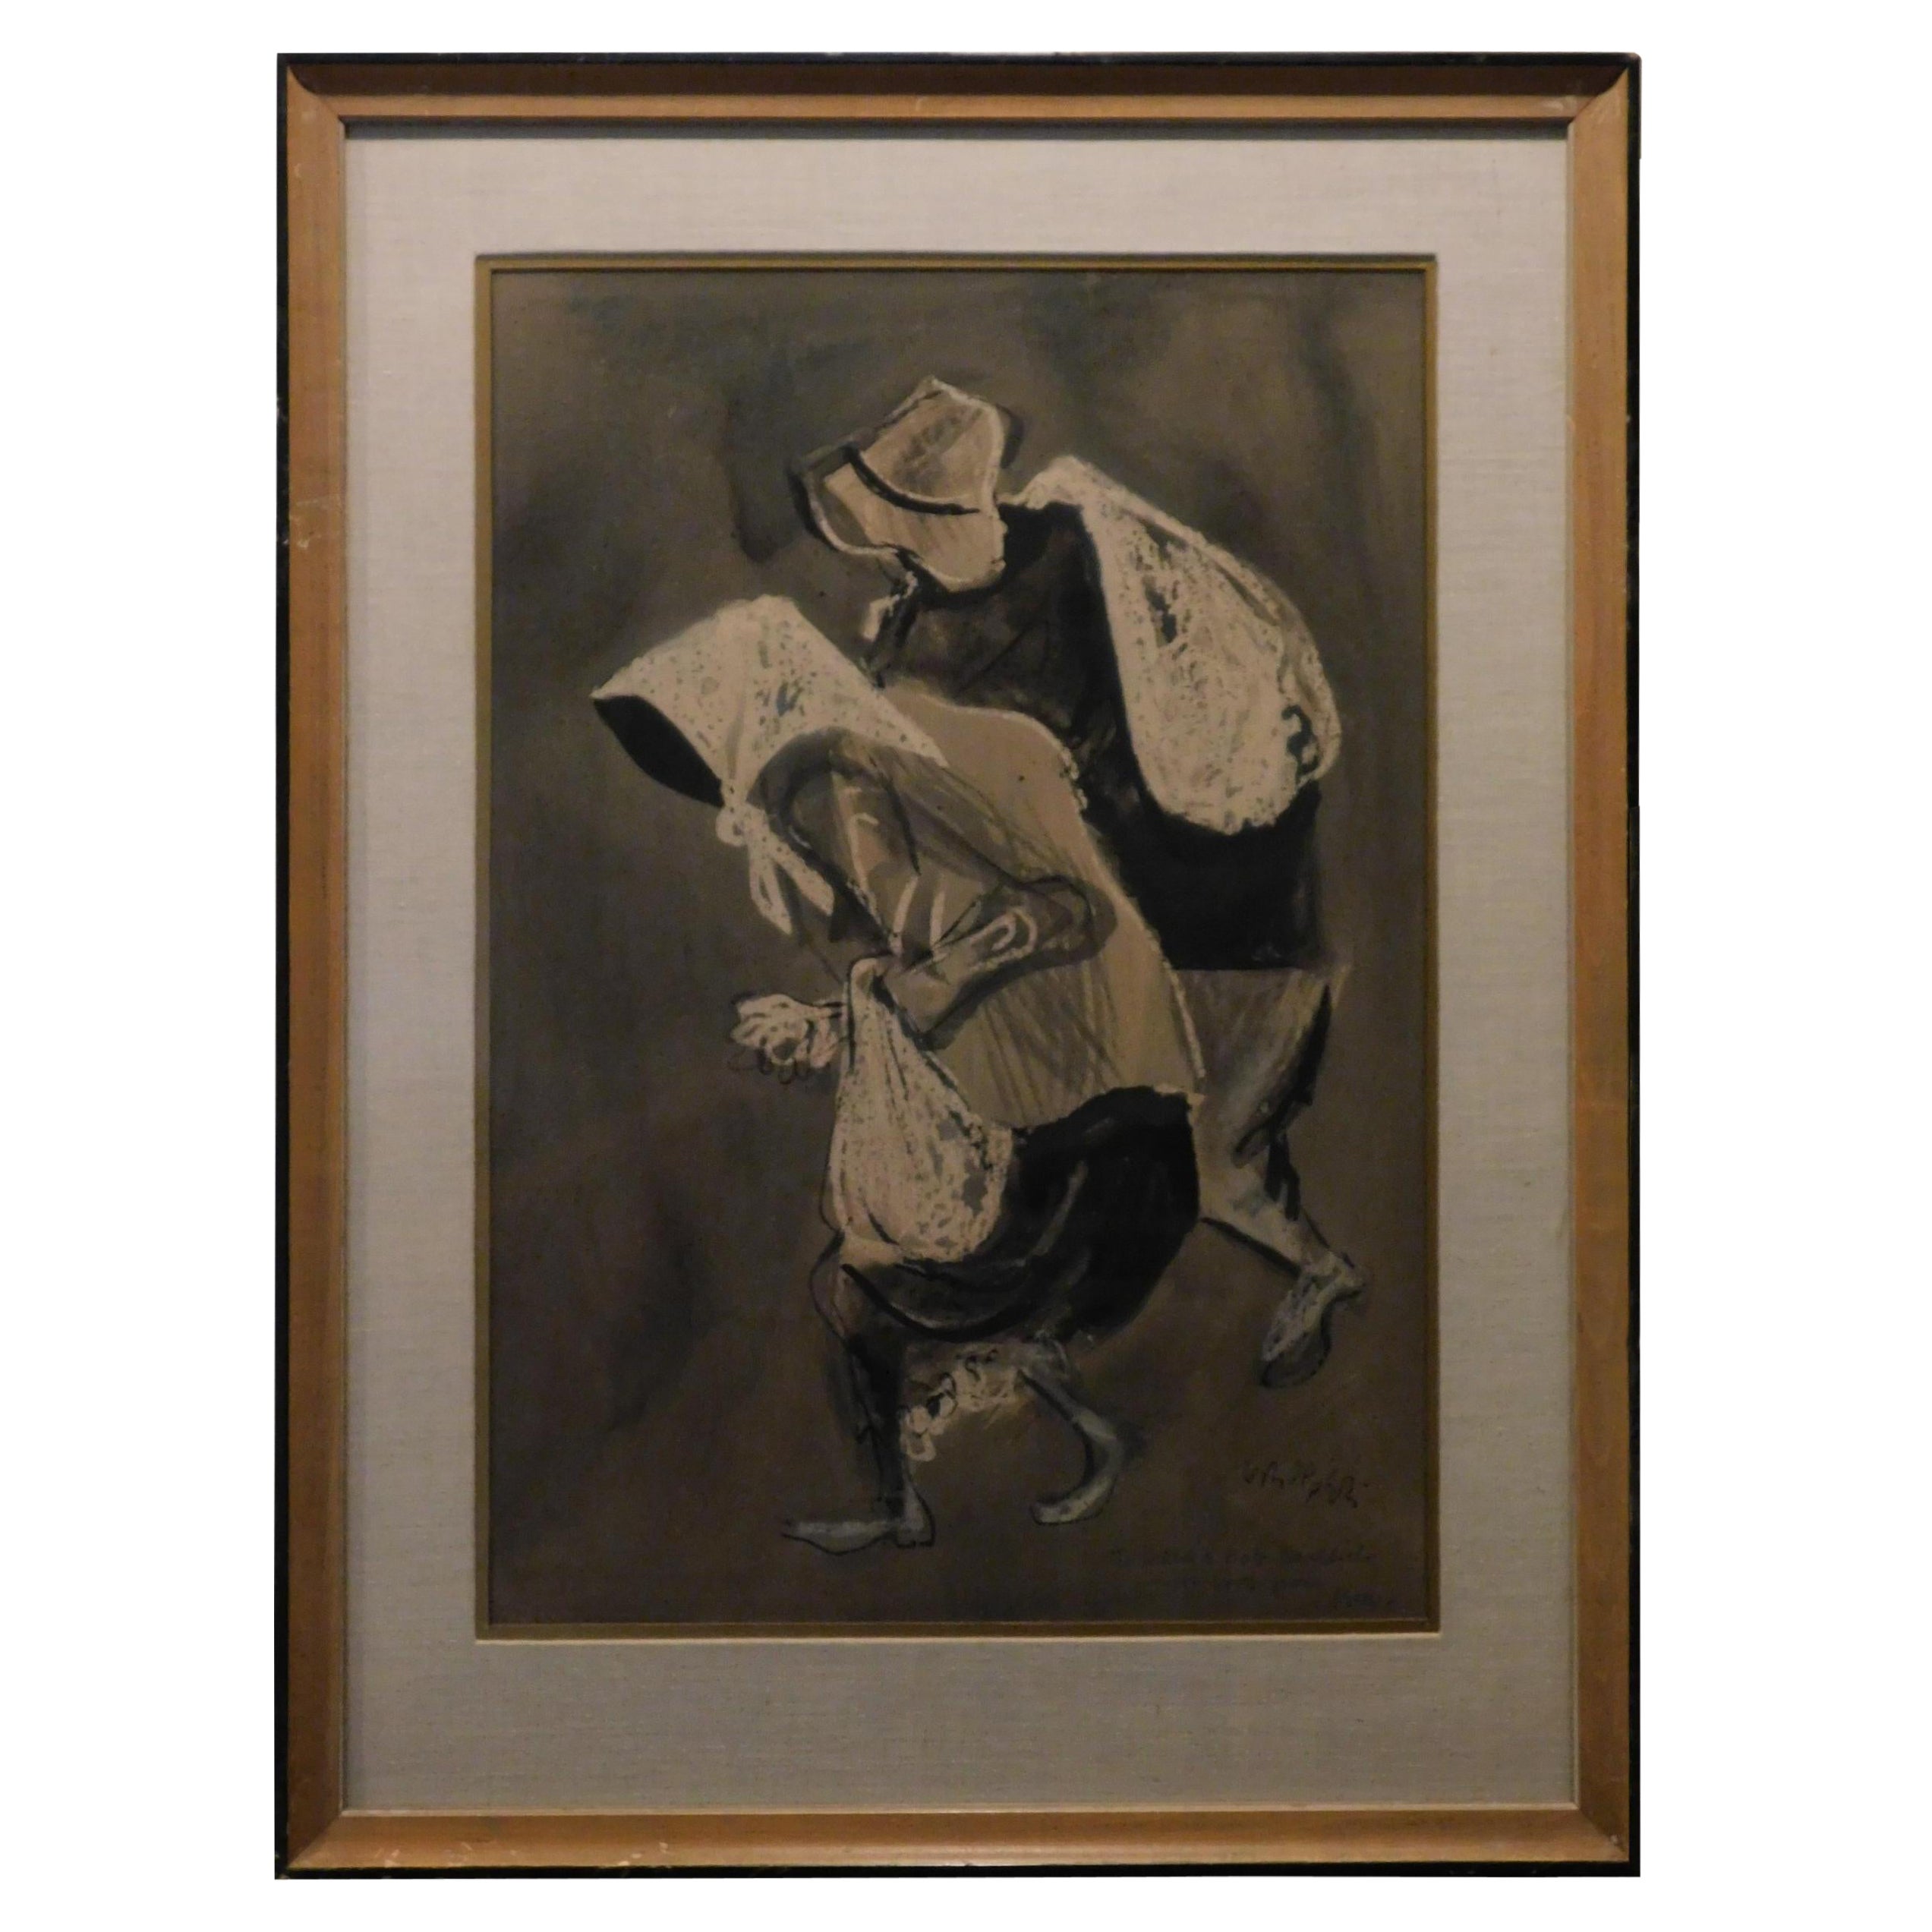 William Gropper WPA Artist Watercolor in Grisaille, circa 1932- “Uprooted” For Sale